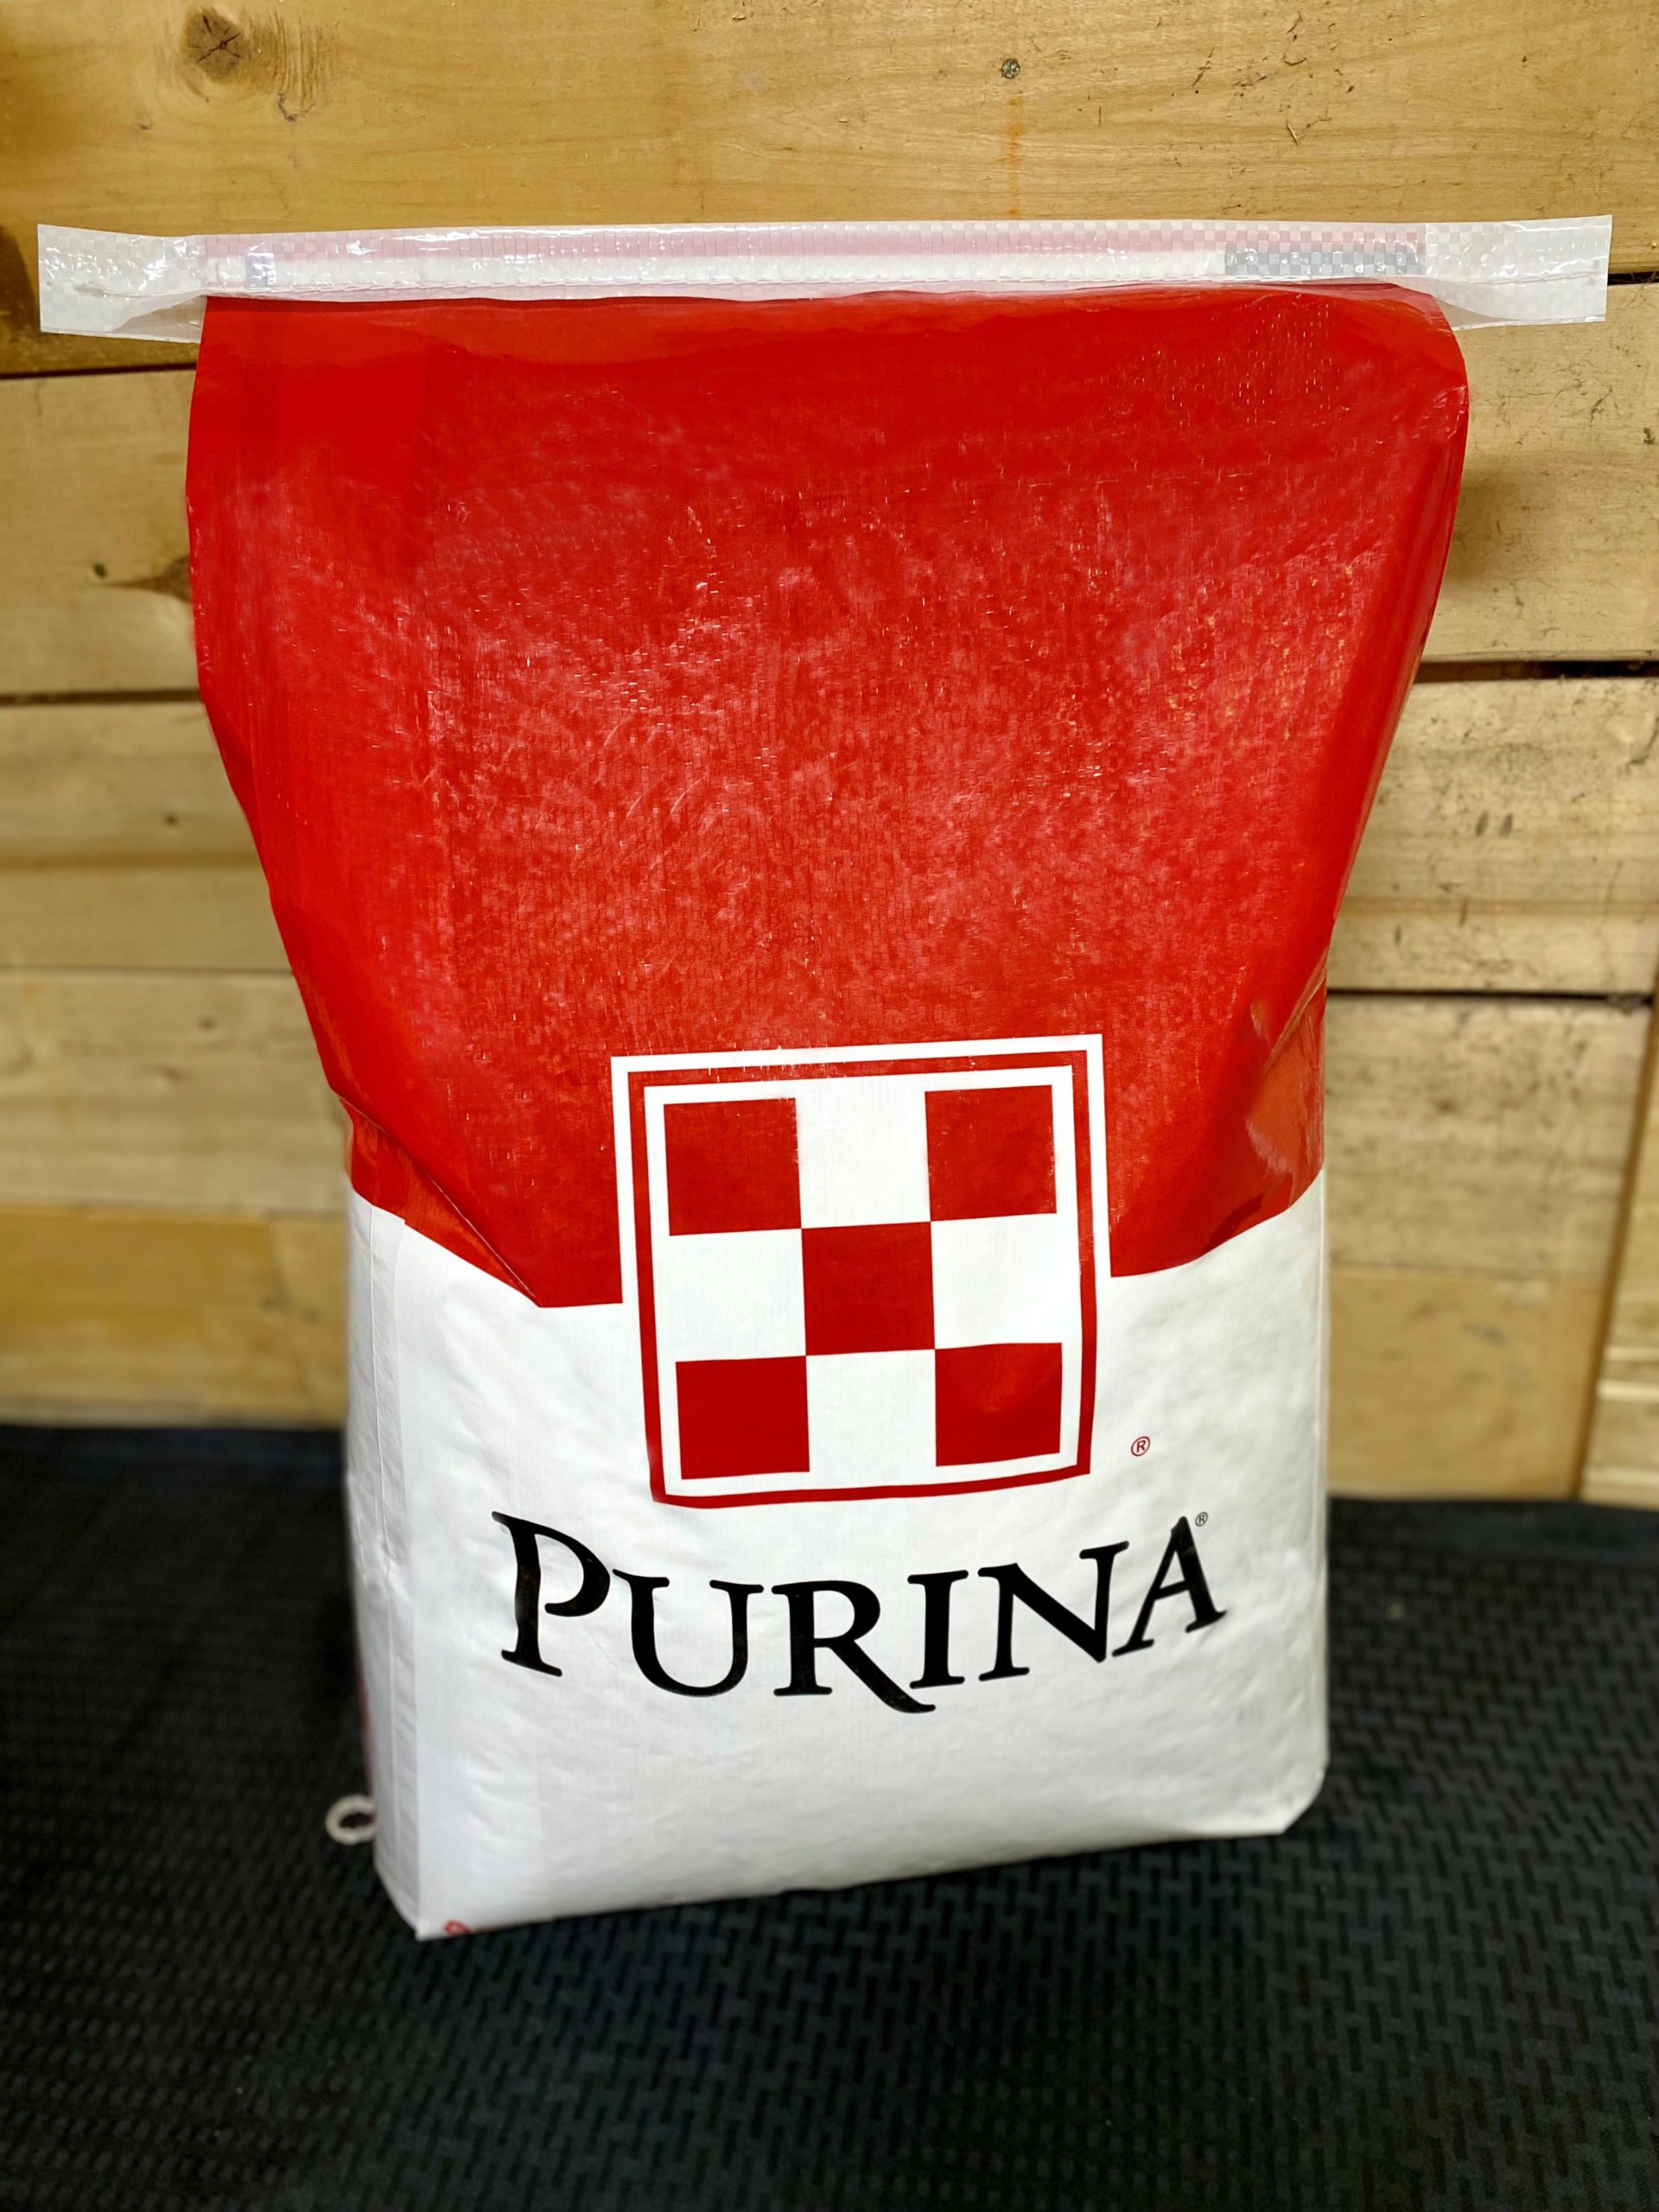 PURINA MINERAL SHEEP MEAL